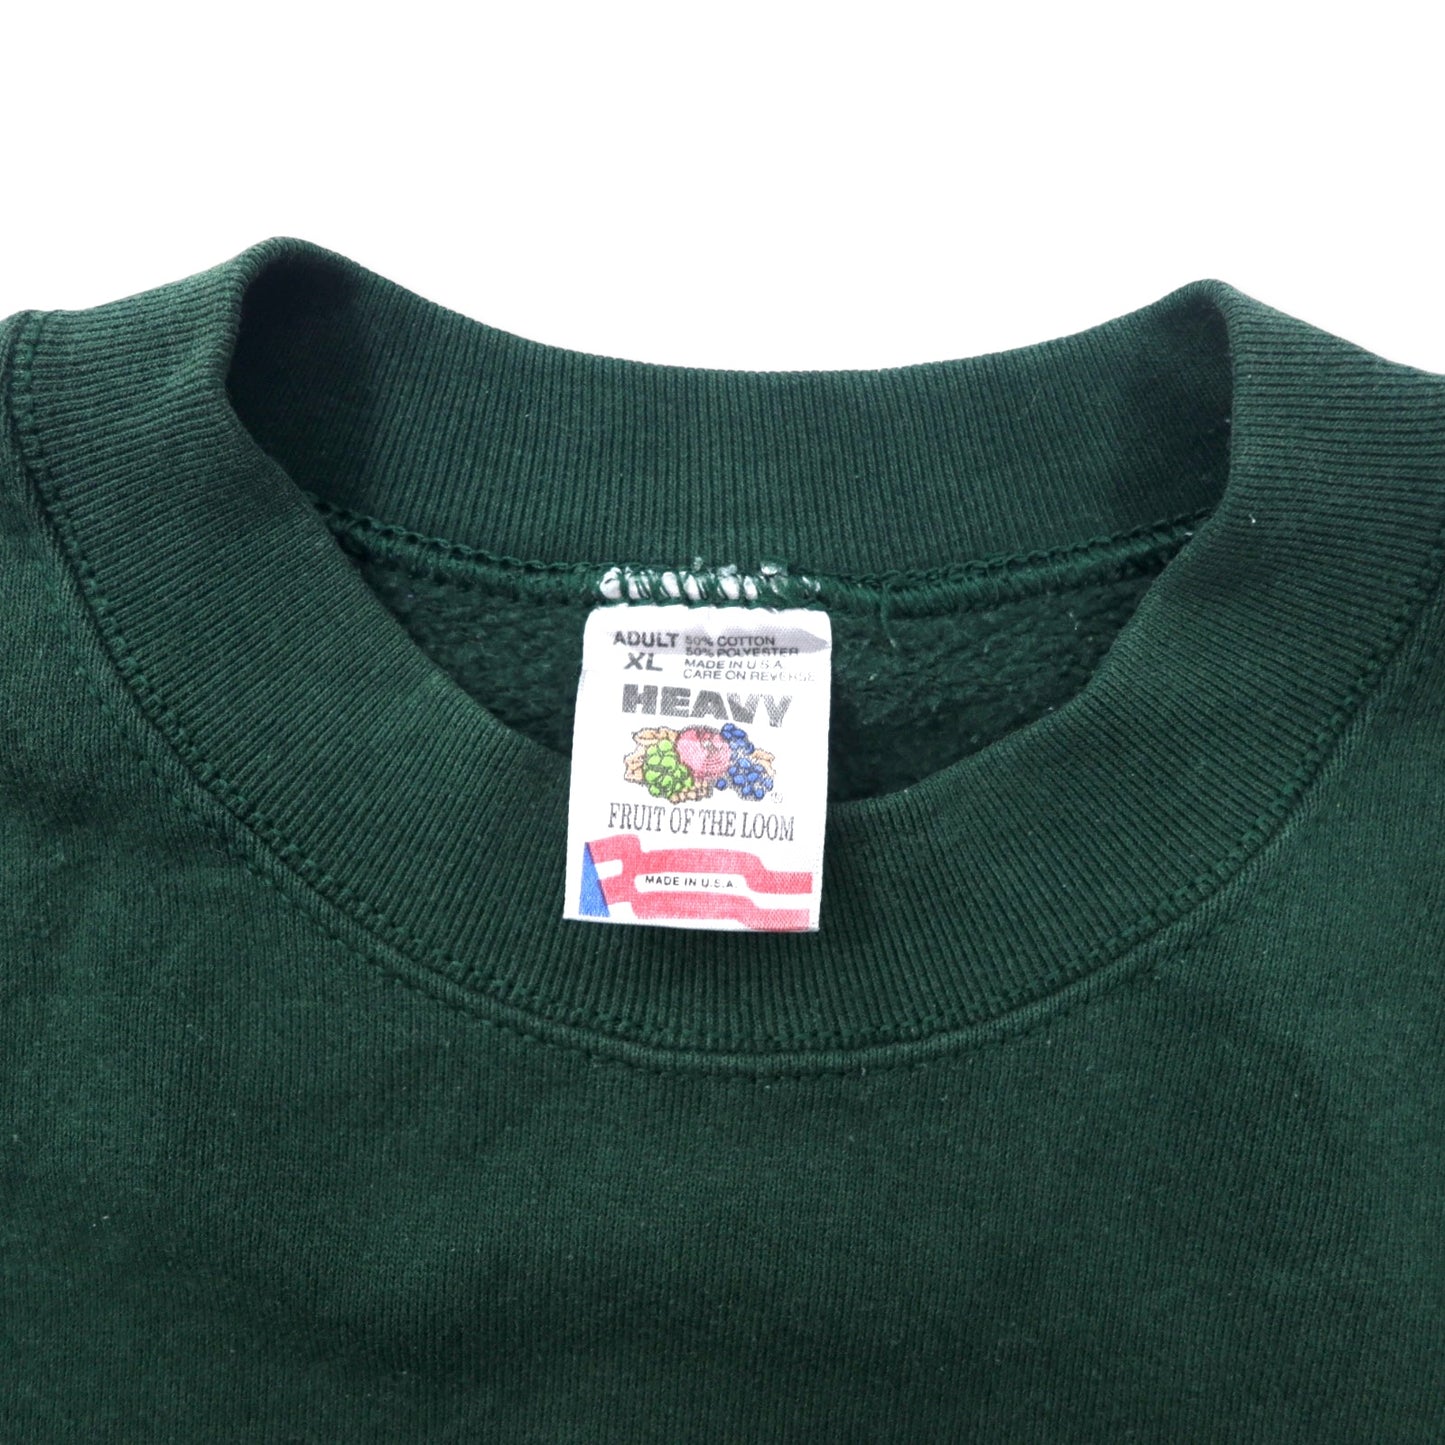 FRUIT OF THE LOOM USA製 90年代 プリント スウェット XL グリーン コットン DAD'S WEEKEND バックプリント